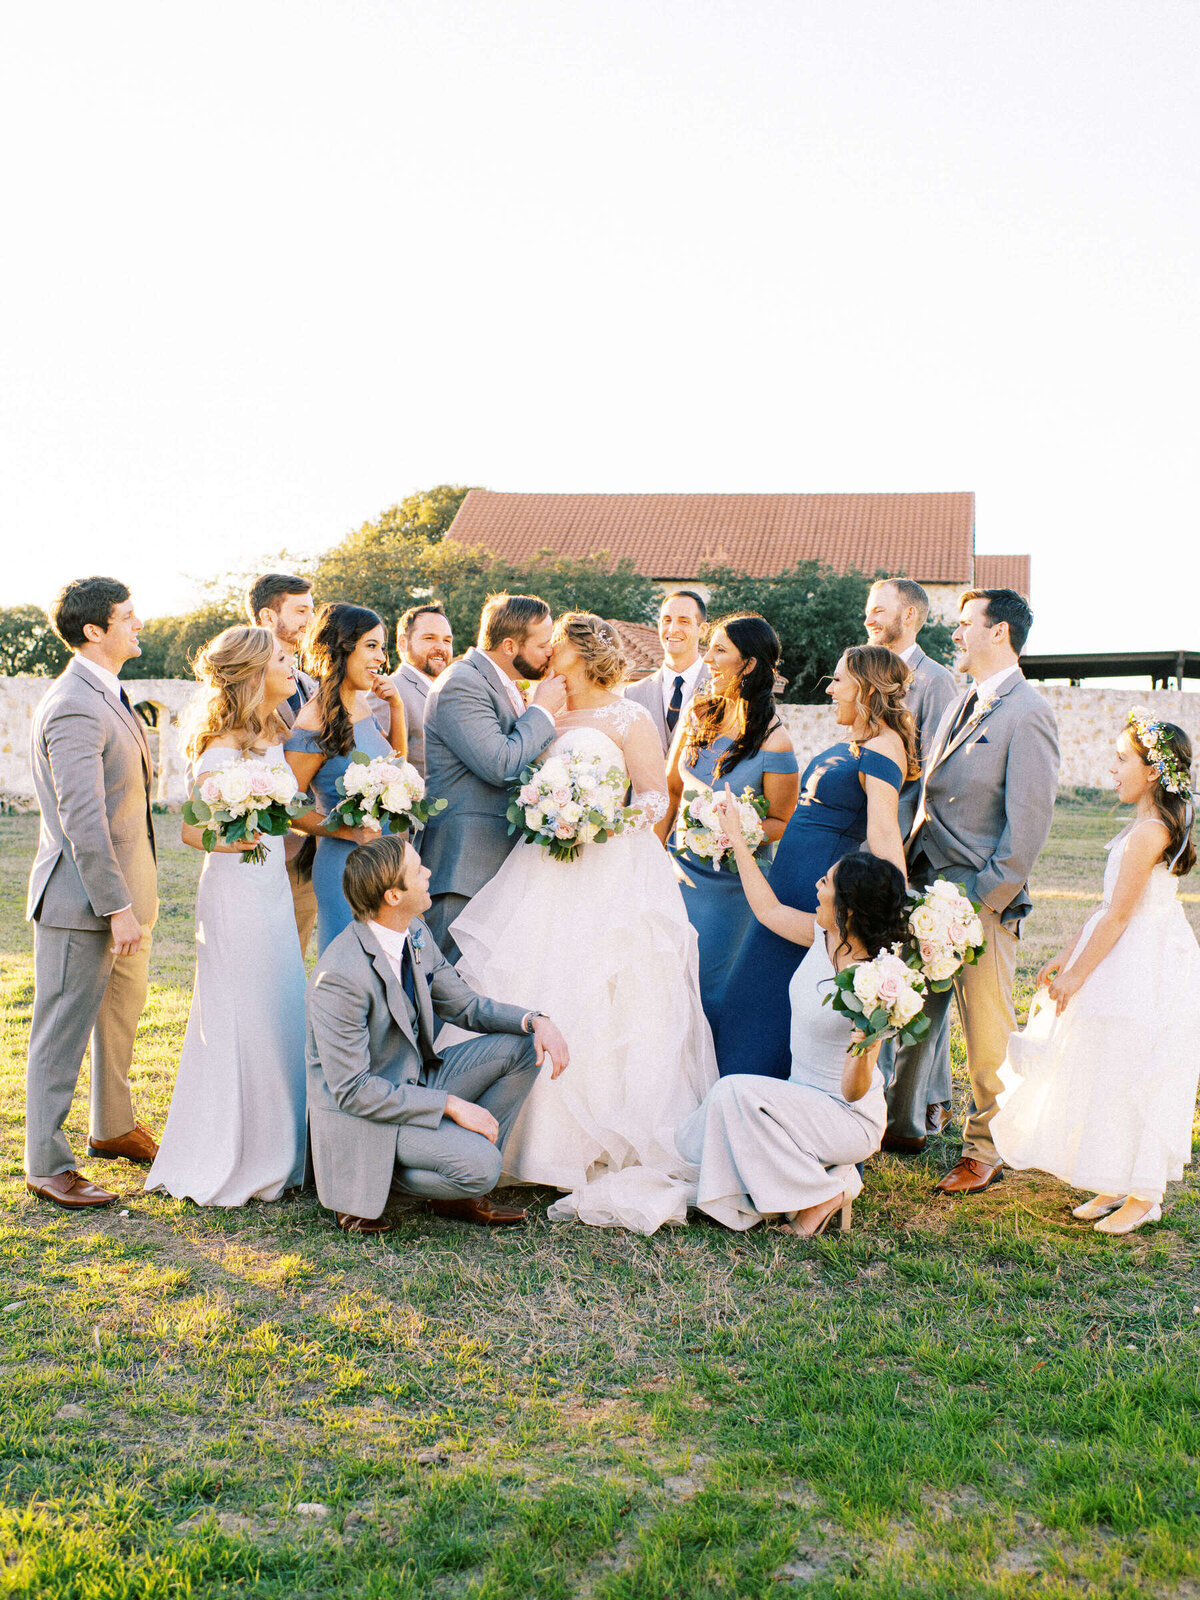 Wedding party celebrates with bride and groom at spring Texas wedding